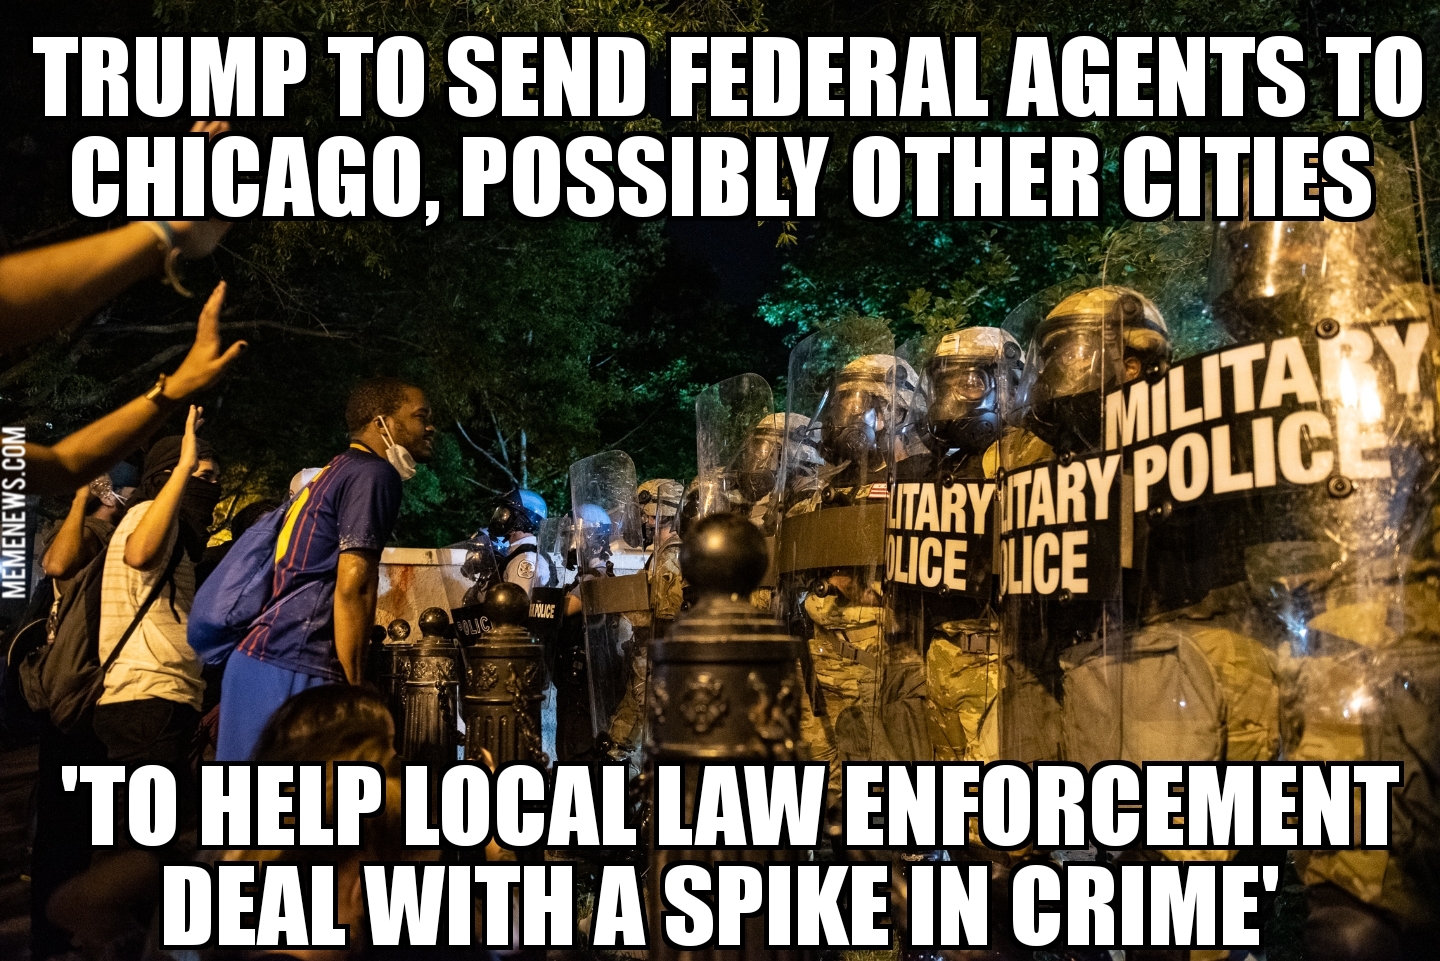 Trump to send federal agents to Chicago